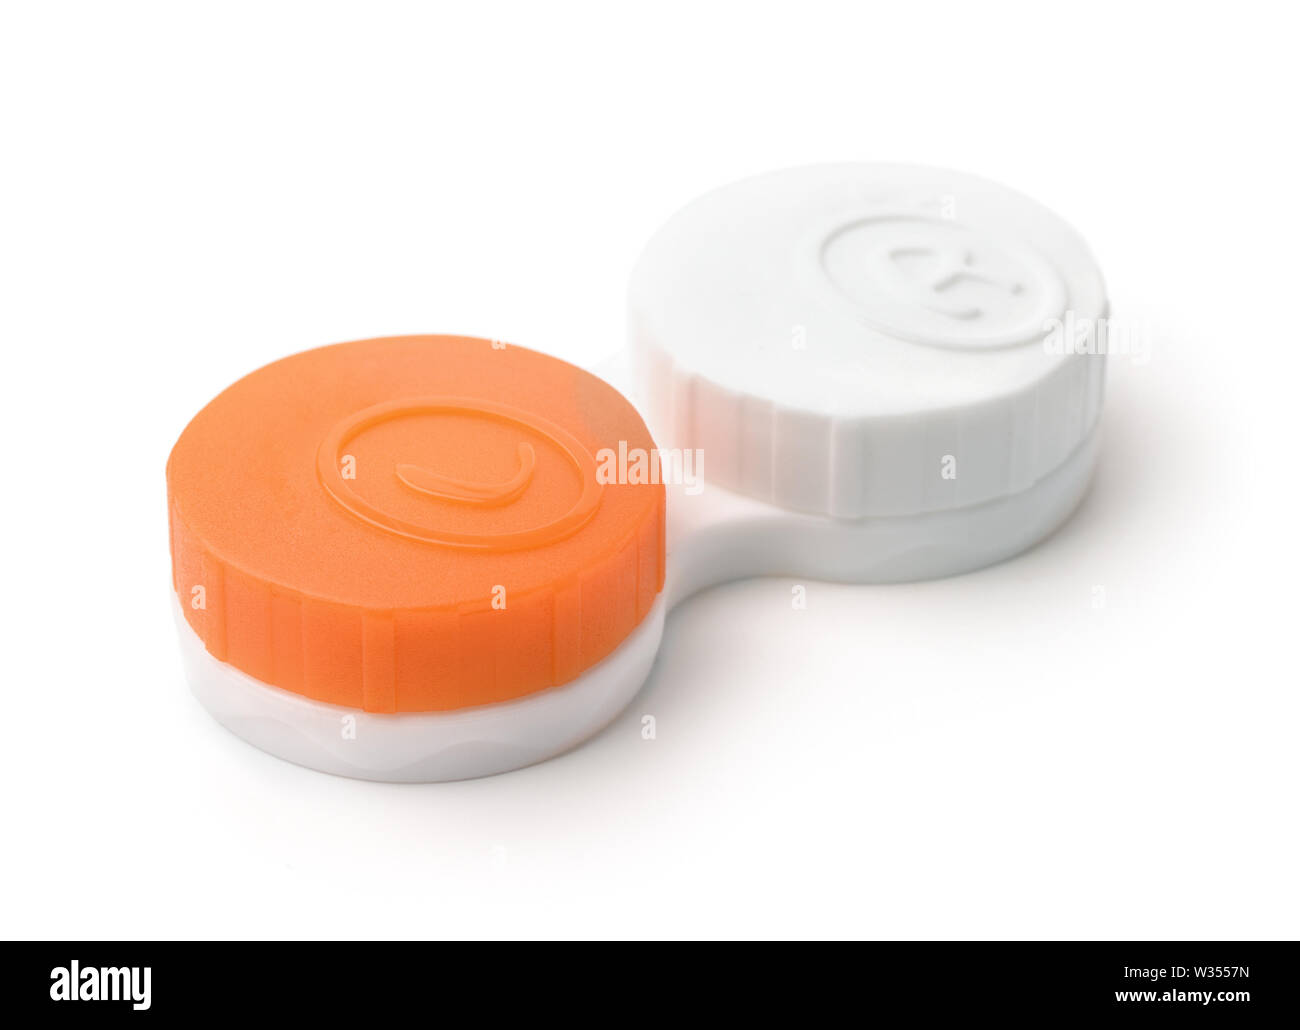 Contact lens case isolated on white Stock Photo